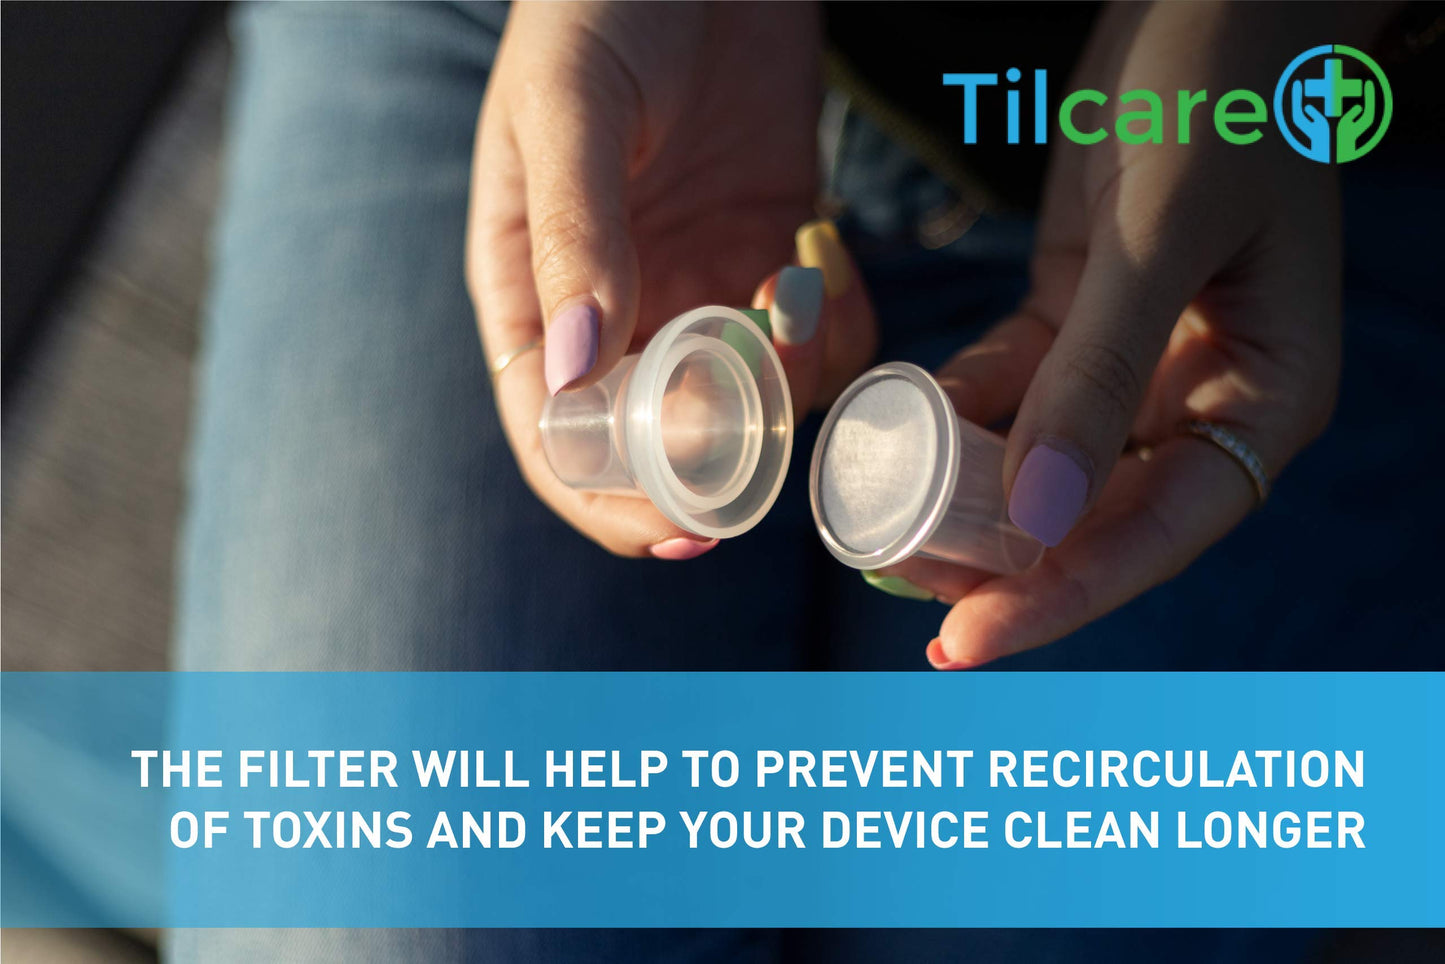 Bacterial & Viral Filters Kit for Mucus Relief Cleanser & Lung Expansion Exerciser by Tilcare - Cough Assist Filter - Cleanses the air to Aid with Therapy and keeps your device clean -10 filters added